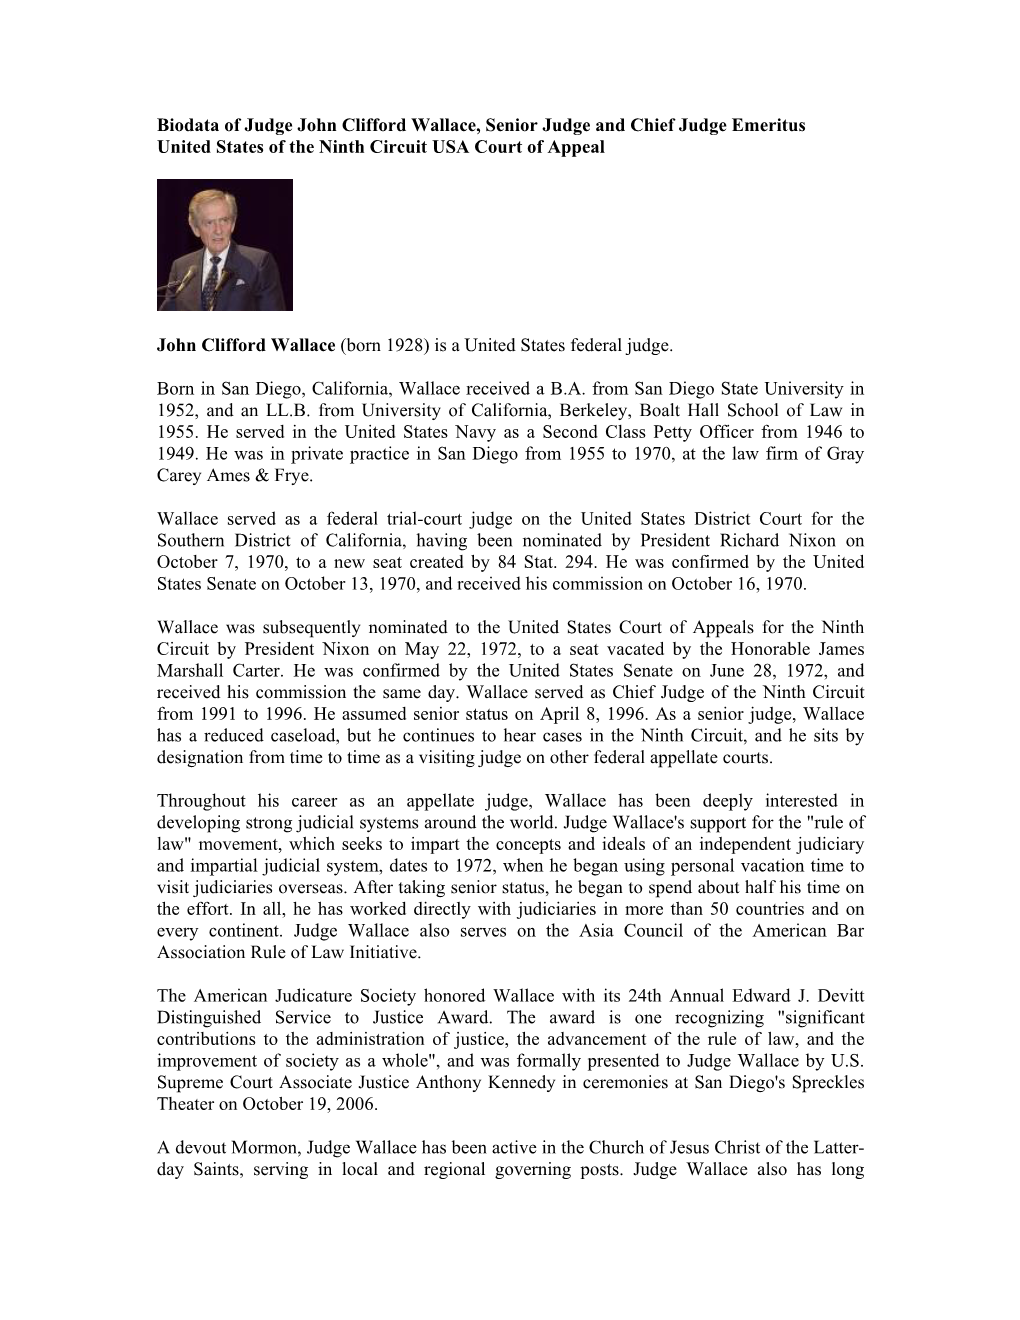 Biodata of Judge John Clifford Wallace, Senior Judge and Chief Judge Emeritus United States of the Ninth Circuit USA Court of Appeal